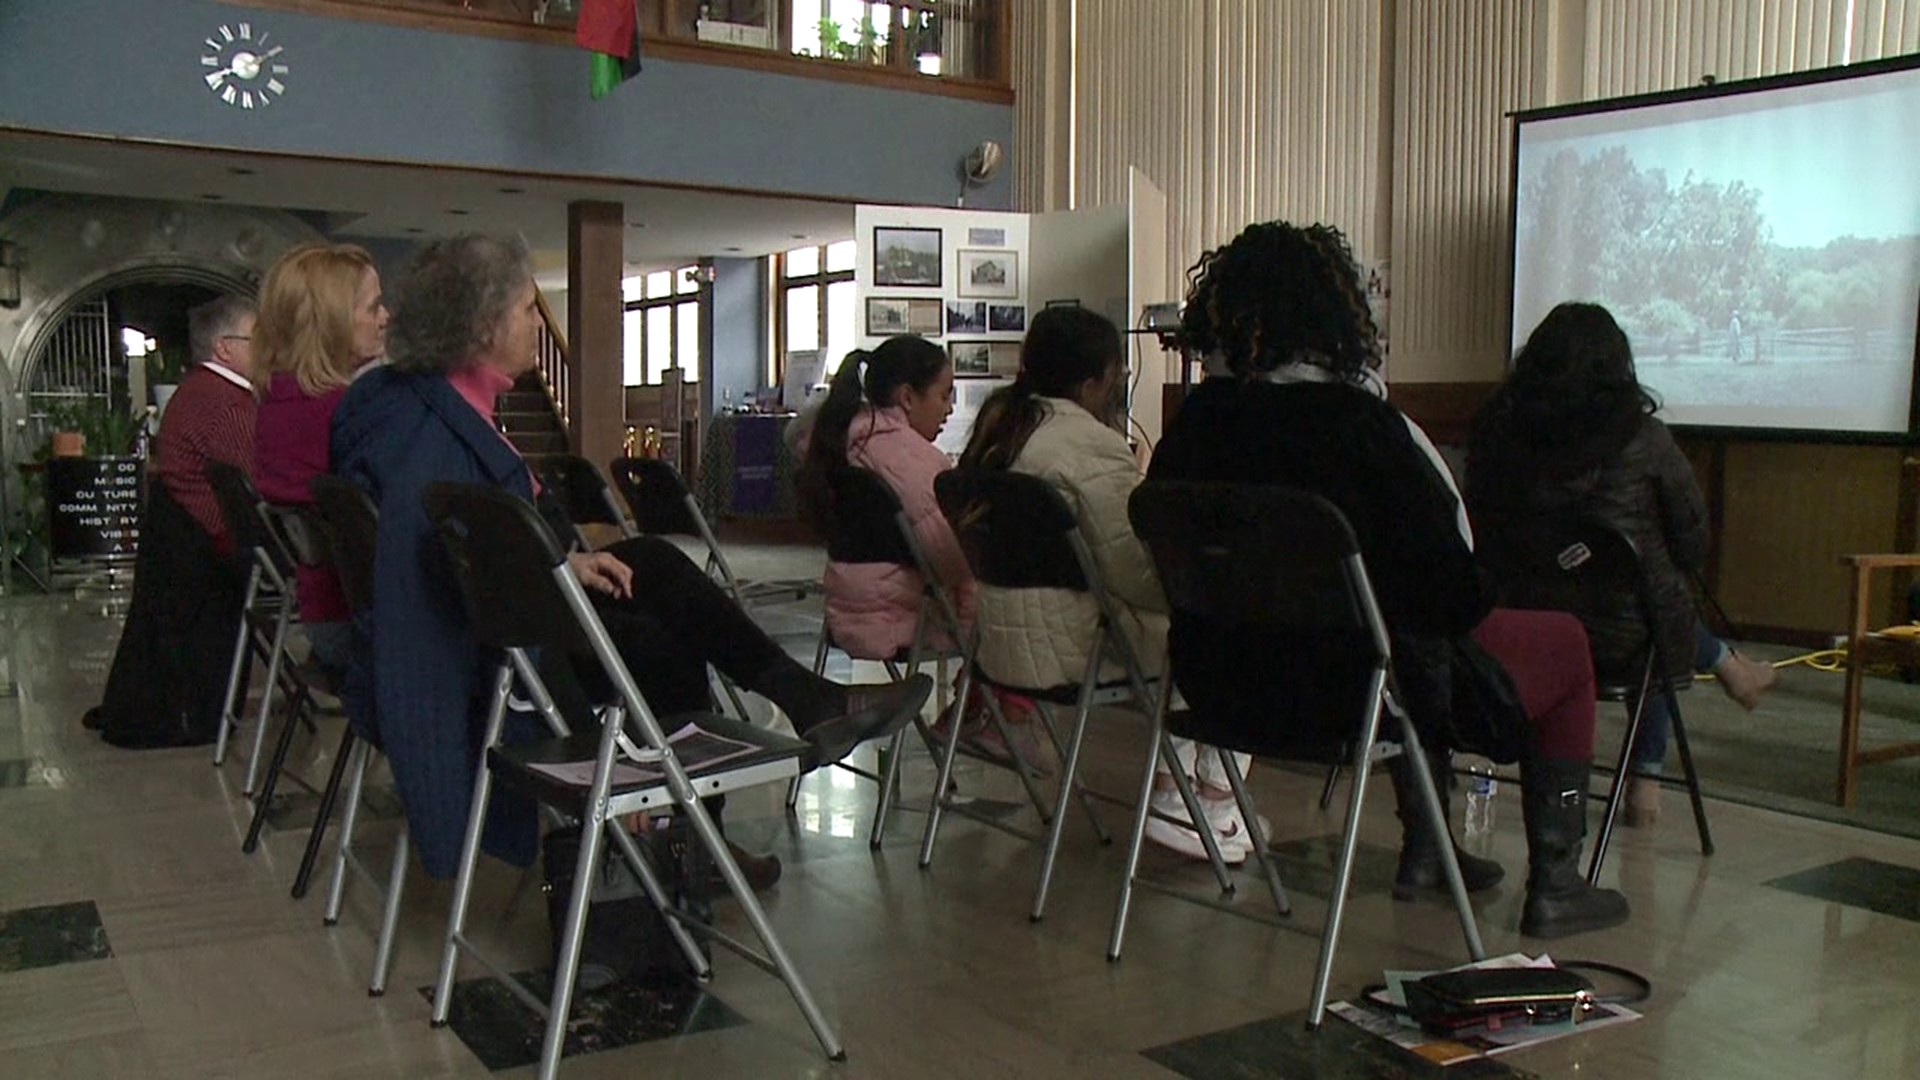 Folks in Scranton celebrated Black History Month Sunday with a documentary showing on Harriet Tubman.